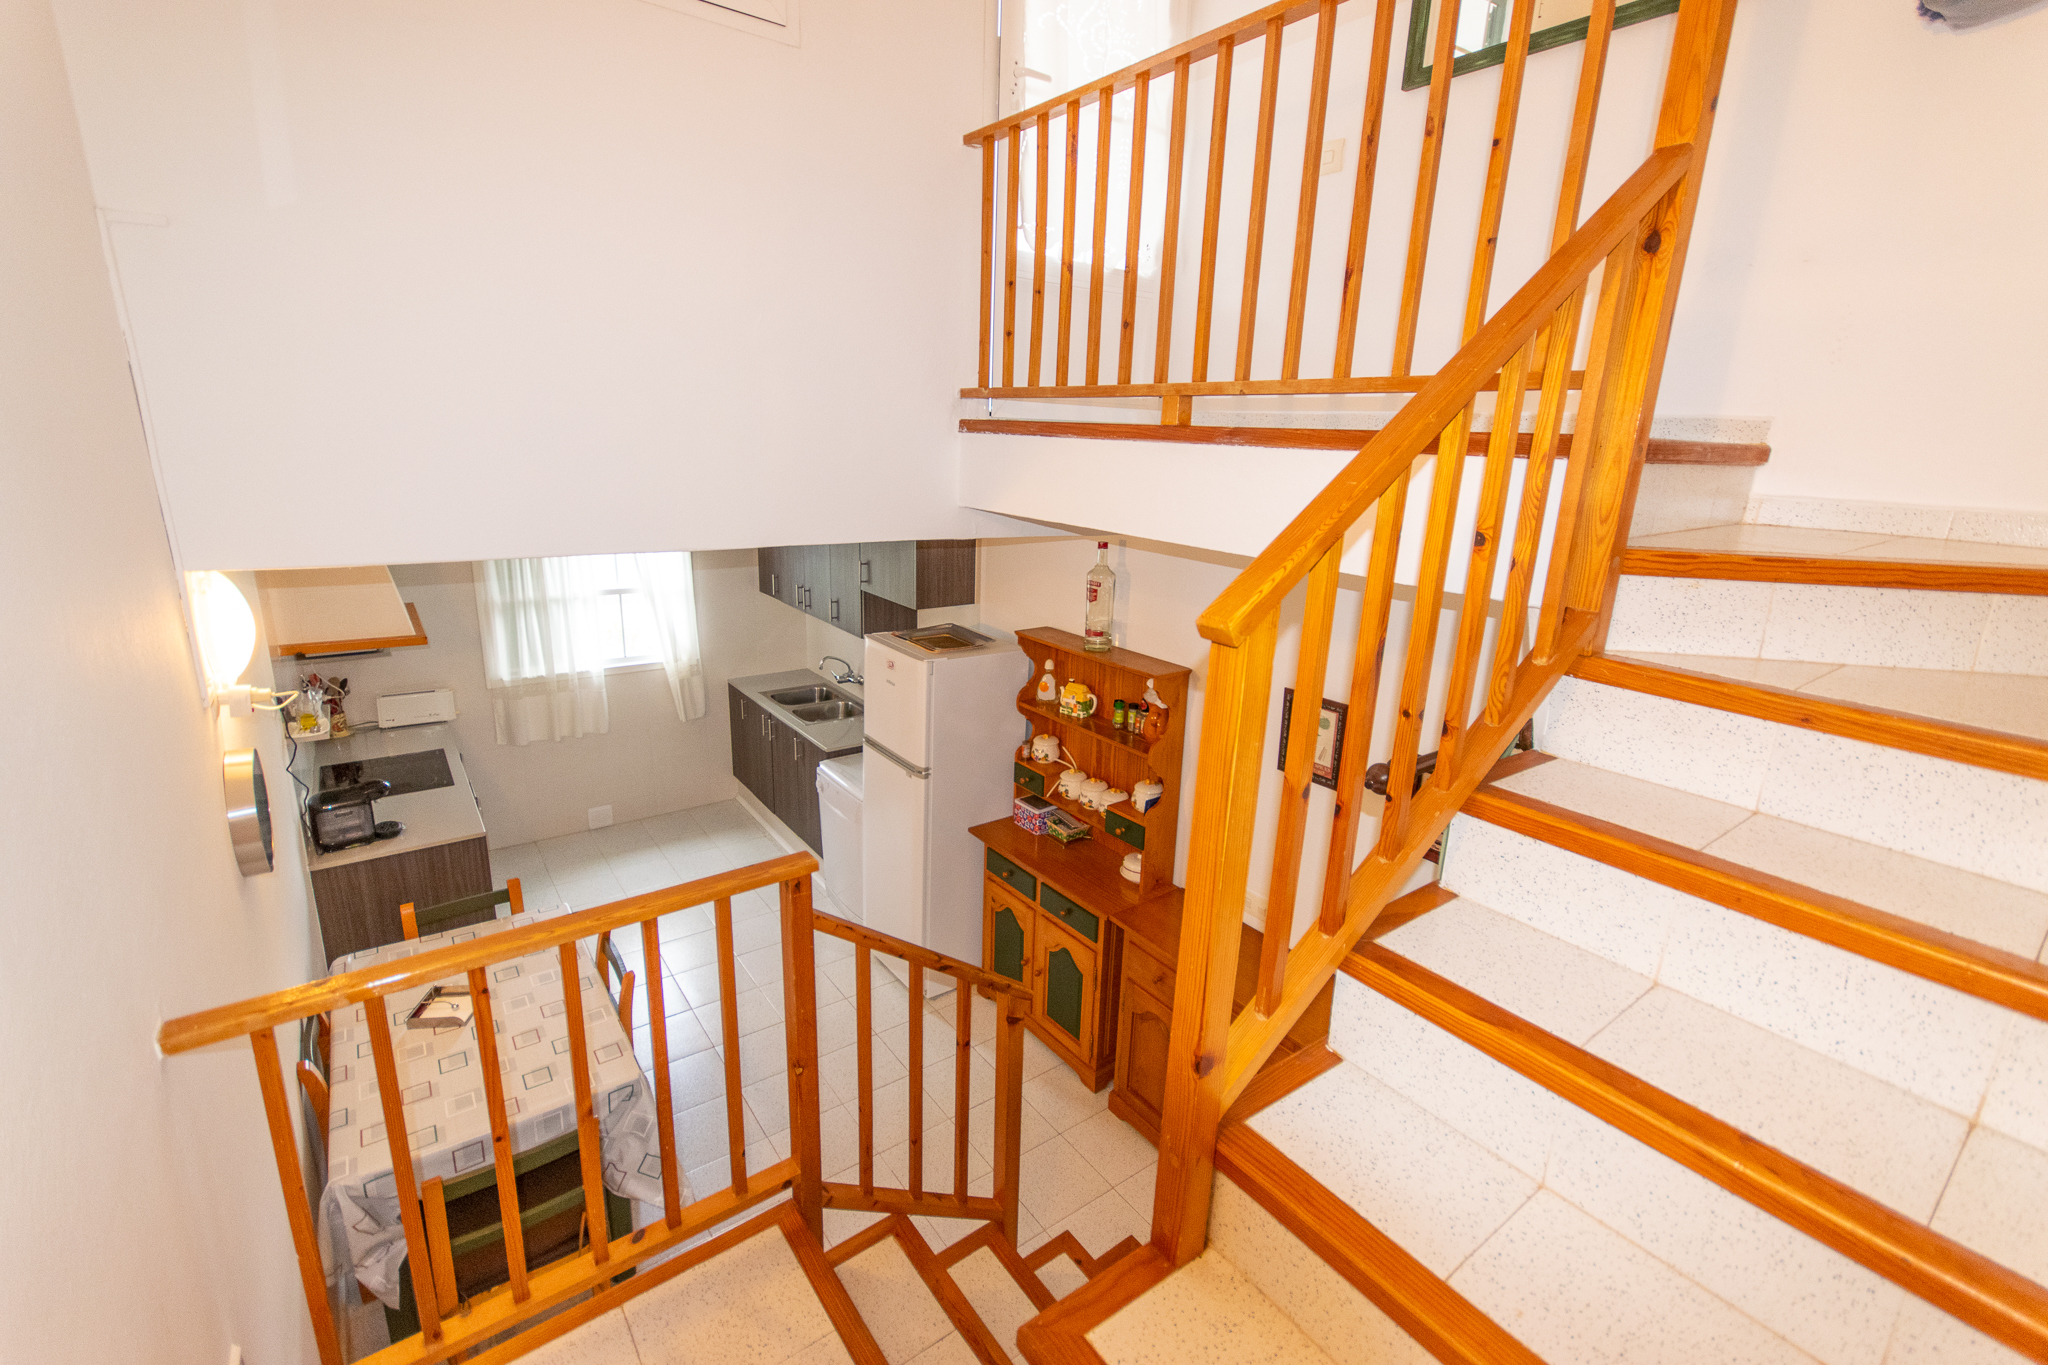 Stairs access ground floor apartment with good views in Cala Galdana